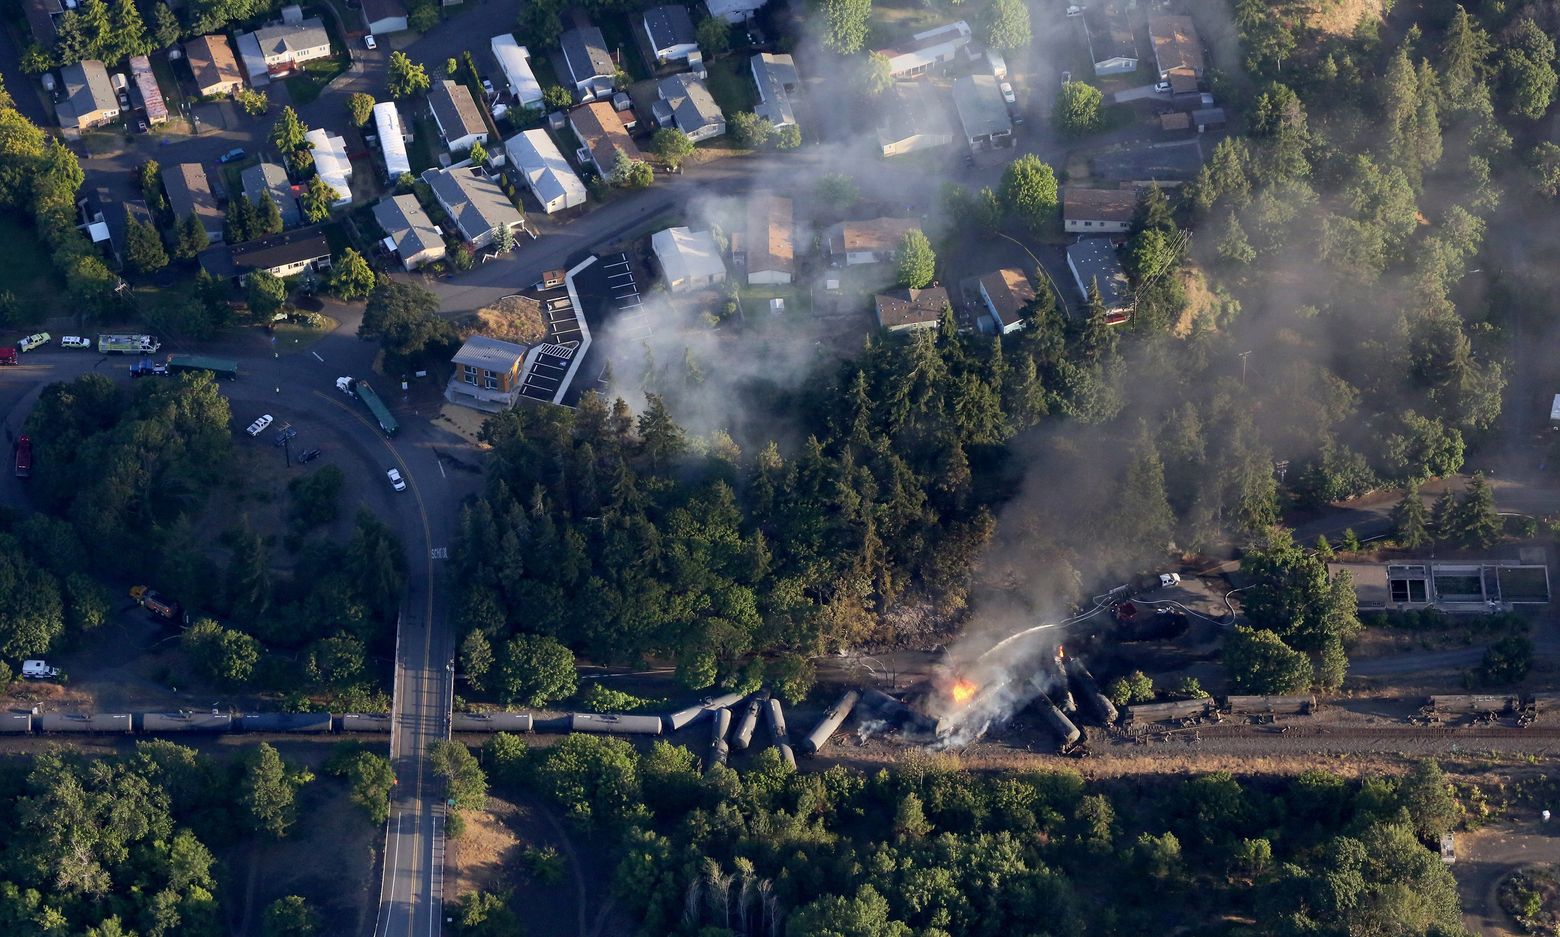 Cost of oil-train derailment along Columbia Gorge: $9 million and rising